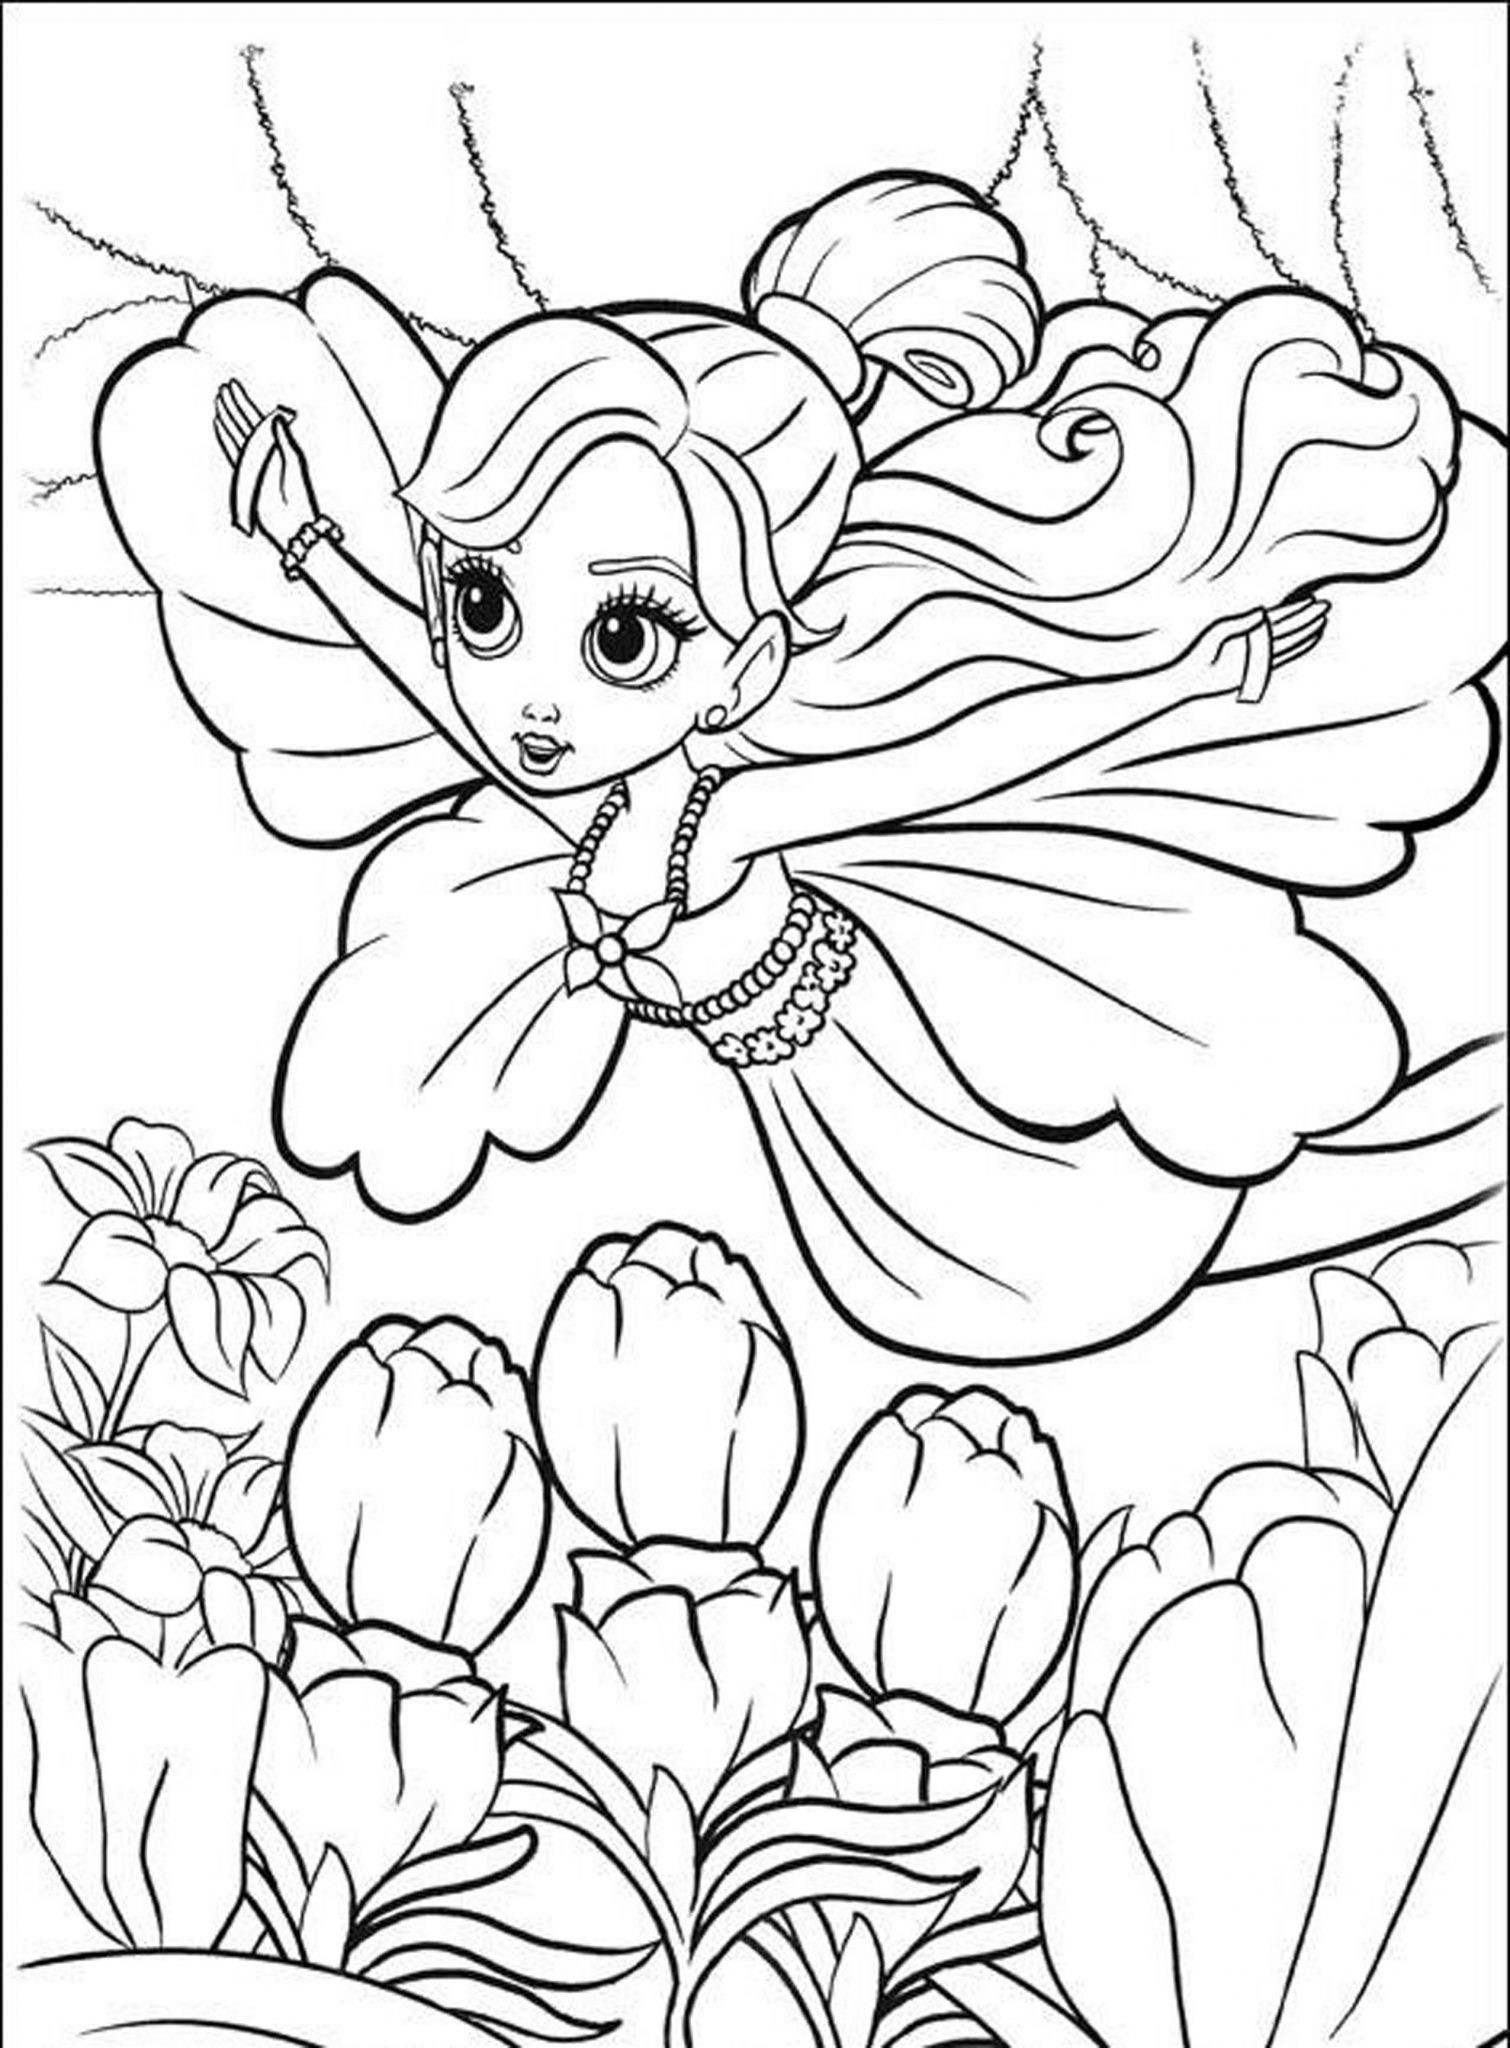 Fun Coloring Pages For Girls
 Print & Download Coloring Pages for Girls Re mend a